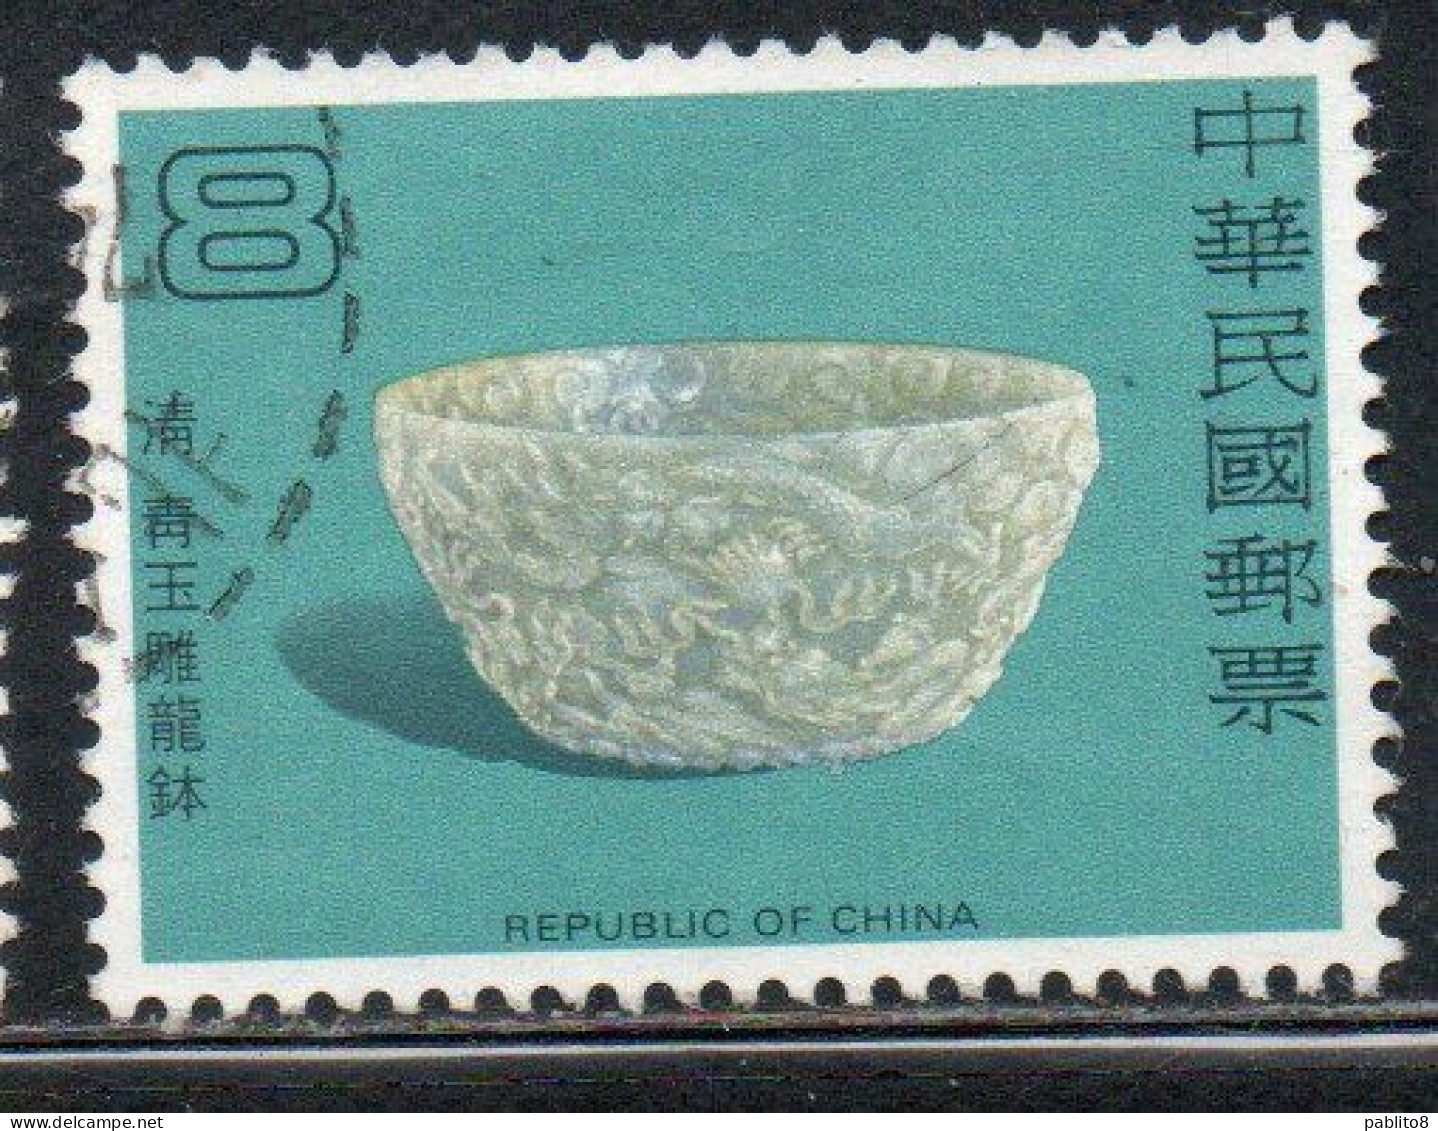 CHINA REPUBLIC CINA TAIWAN FORMOSA 1980 JADE POTTERY MONK'S ALMS BOWL CH'ING DYNASTY 8$ USED USATO OBLITERE' - Used Stamps